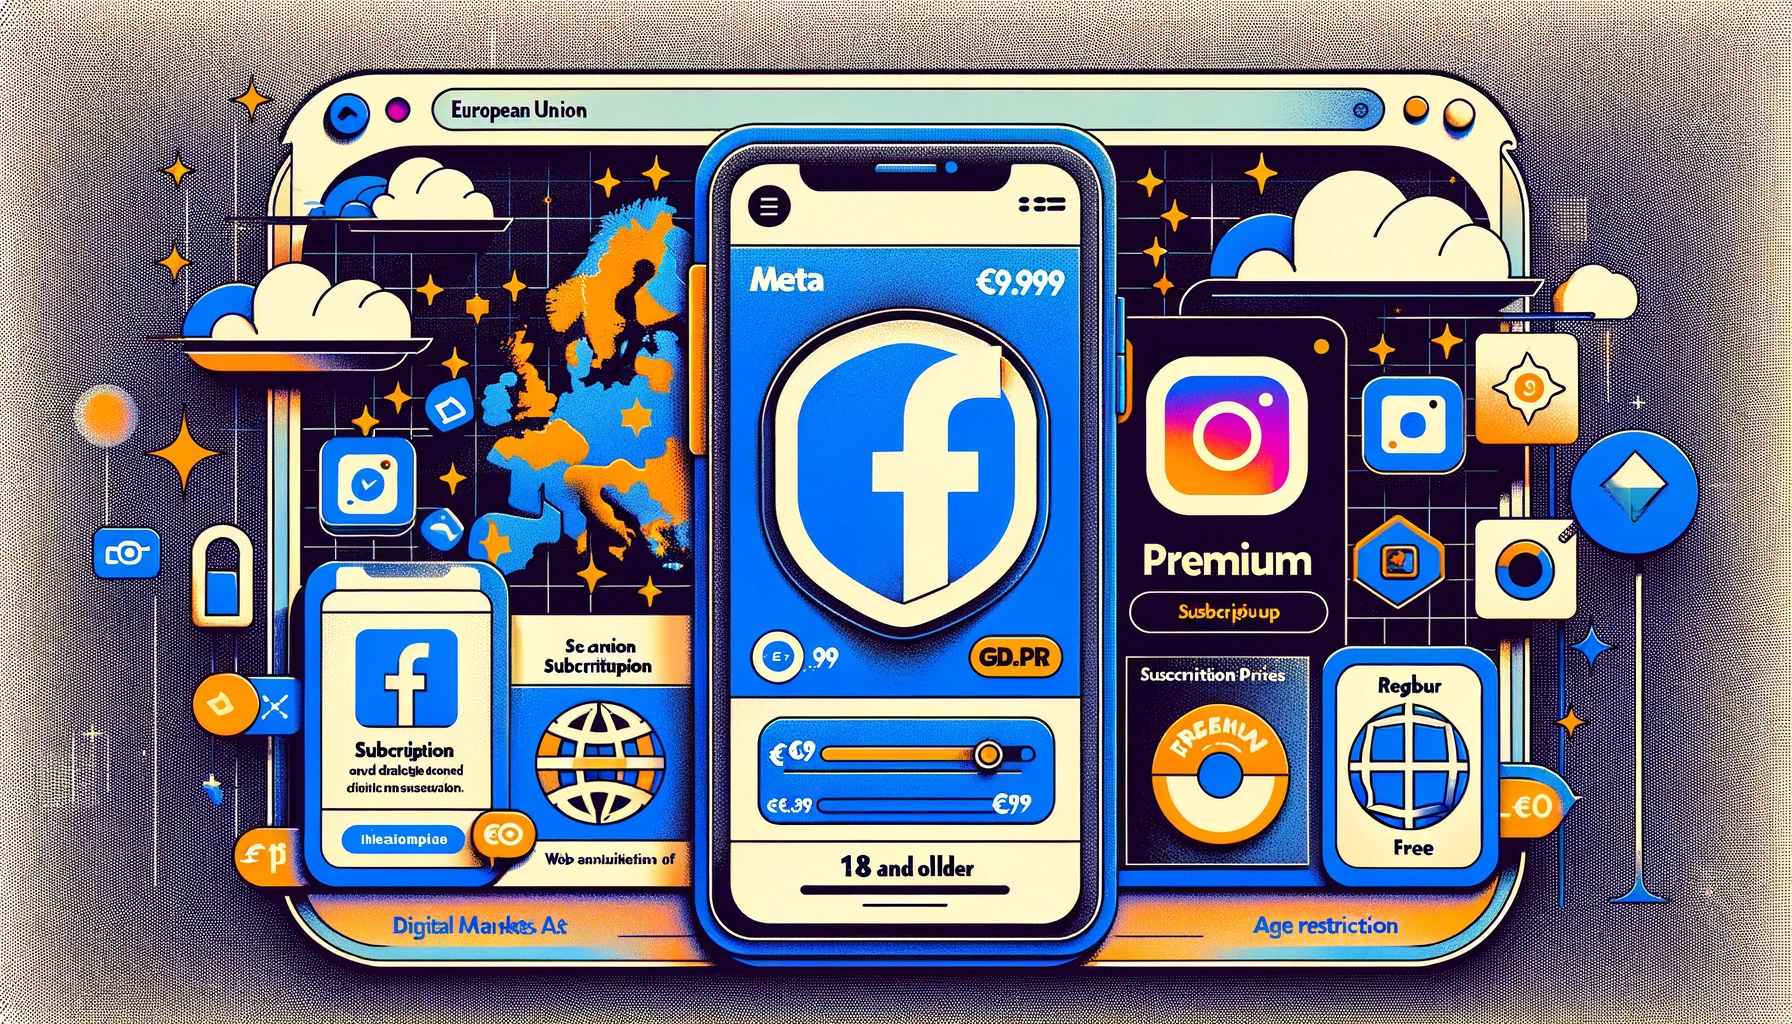 A landscape-oriented digital collage representing Meta's new paid subscription service in the European Union. The image features prominent logos of Facebook and Instagram